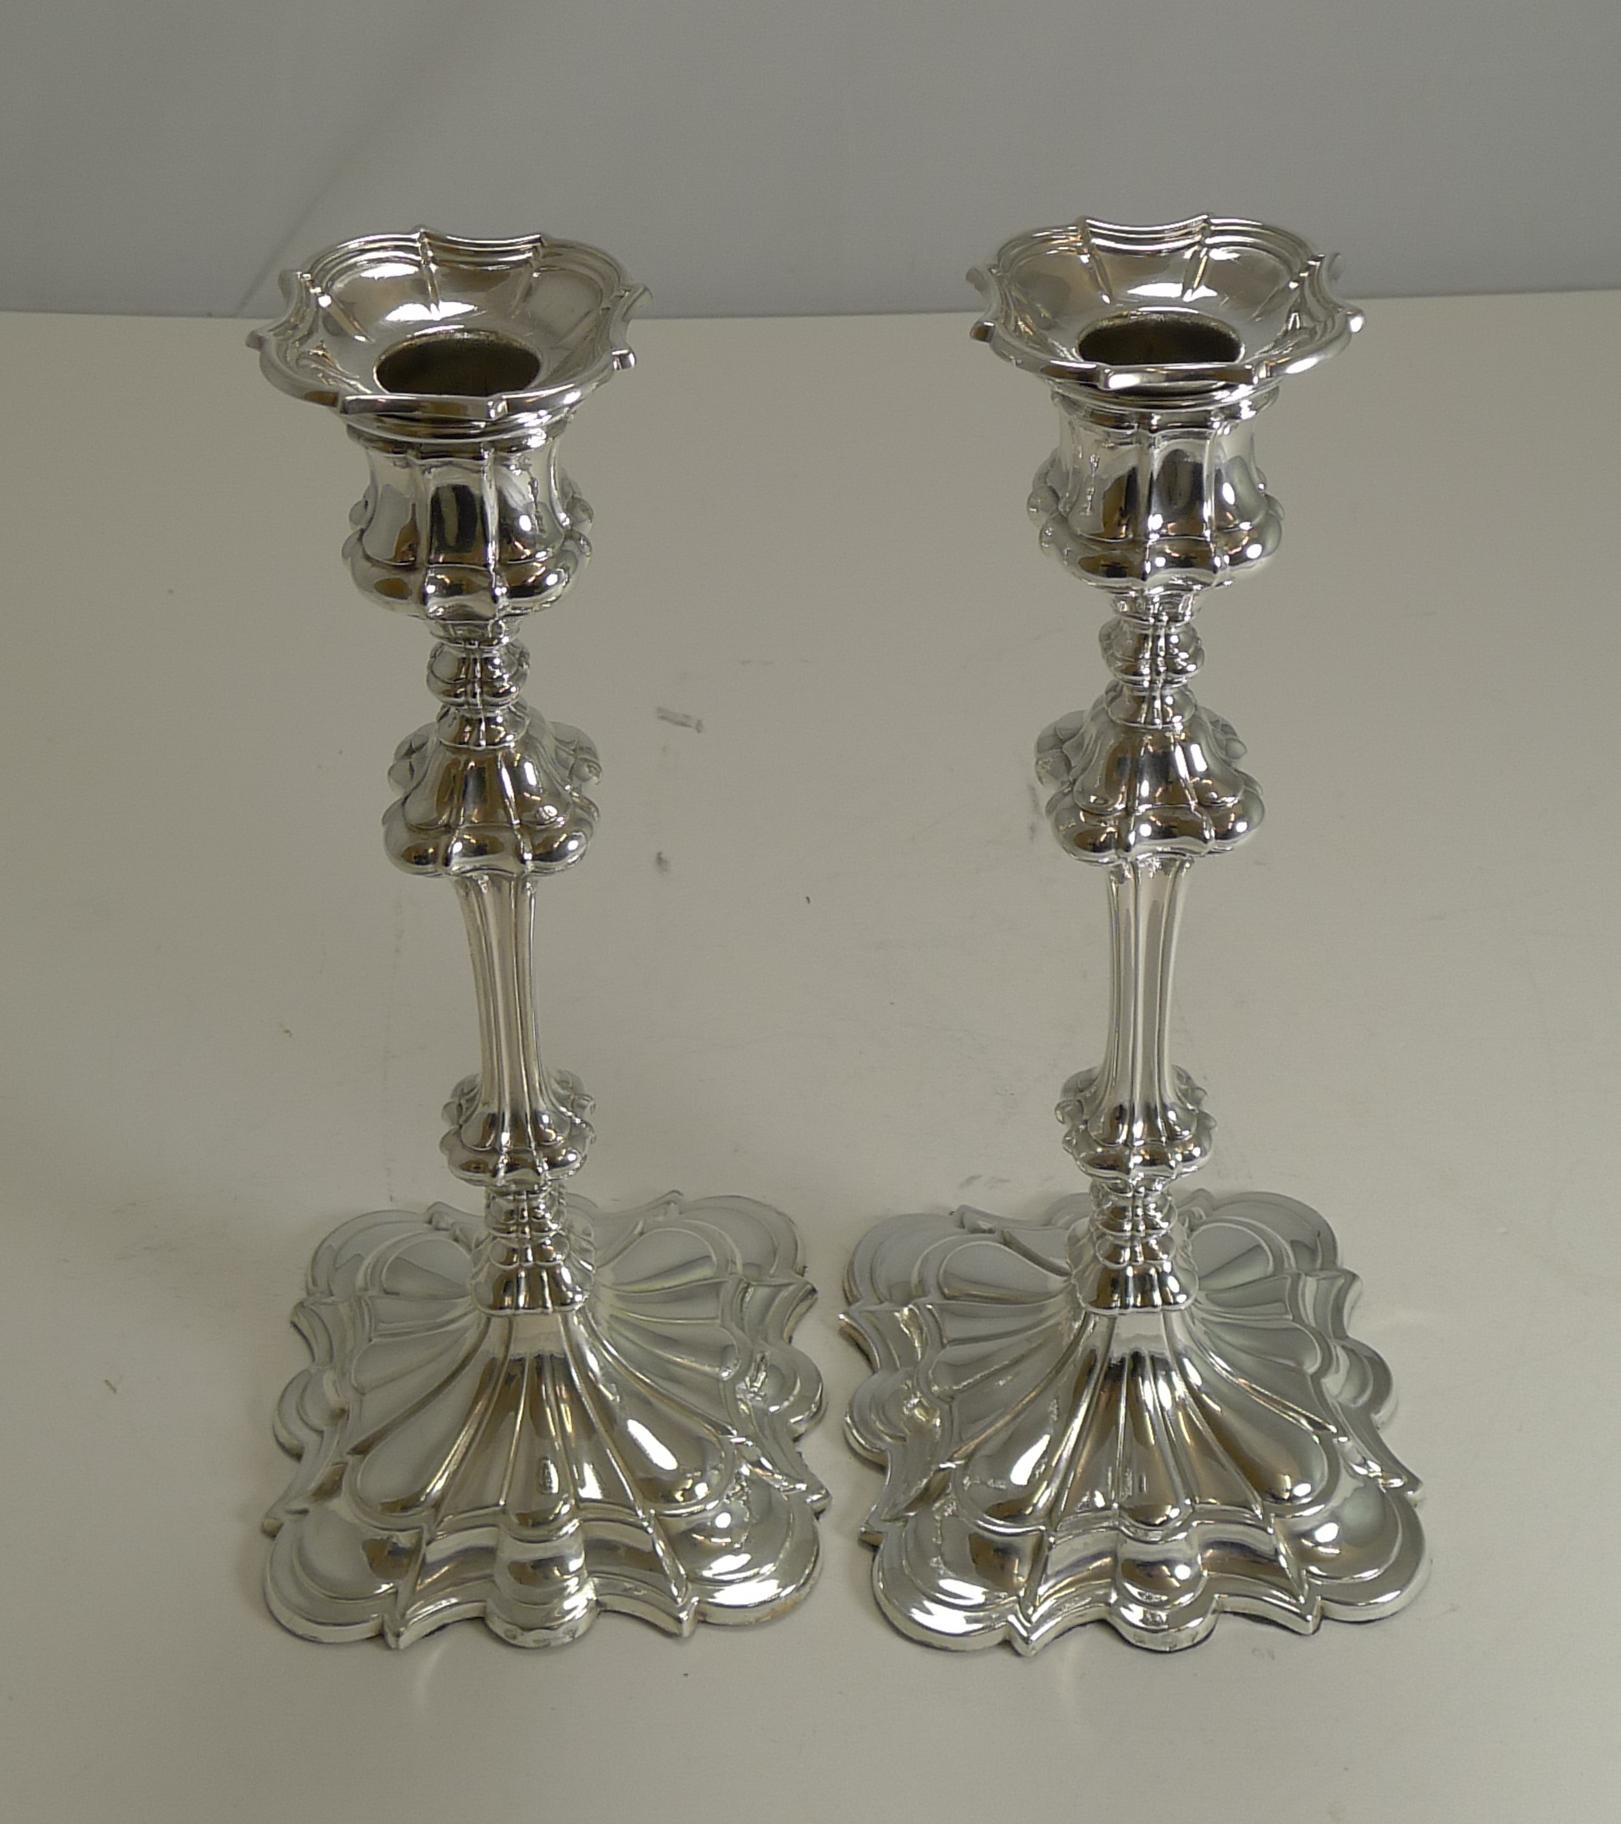 A very smart and elegant pair of silver plated candlesticks by the top notch silversmith, Elkington & Co.

A fabulous early pair, early Victorian; being Elkington, we are able to date them accurately, having a date number for the year